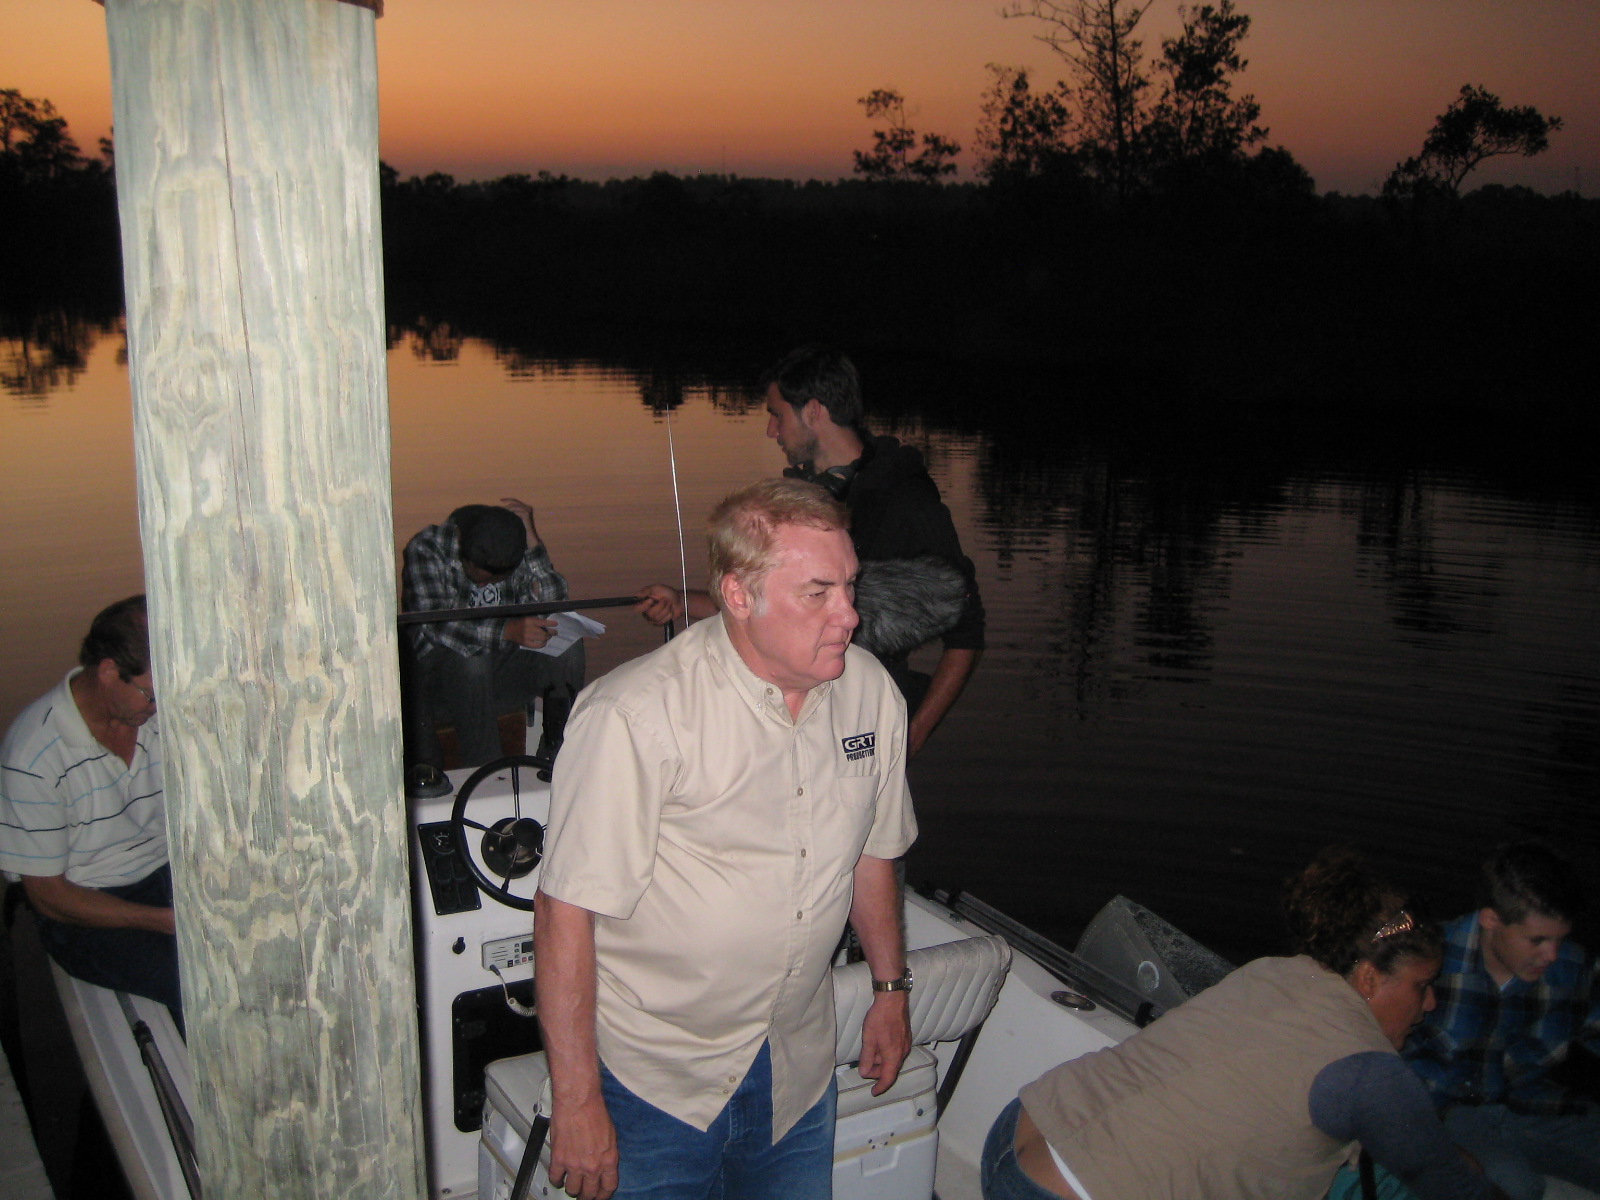 Preparing quickly for sunset shoot on Wolf River, Pass Christian, Mississippi